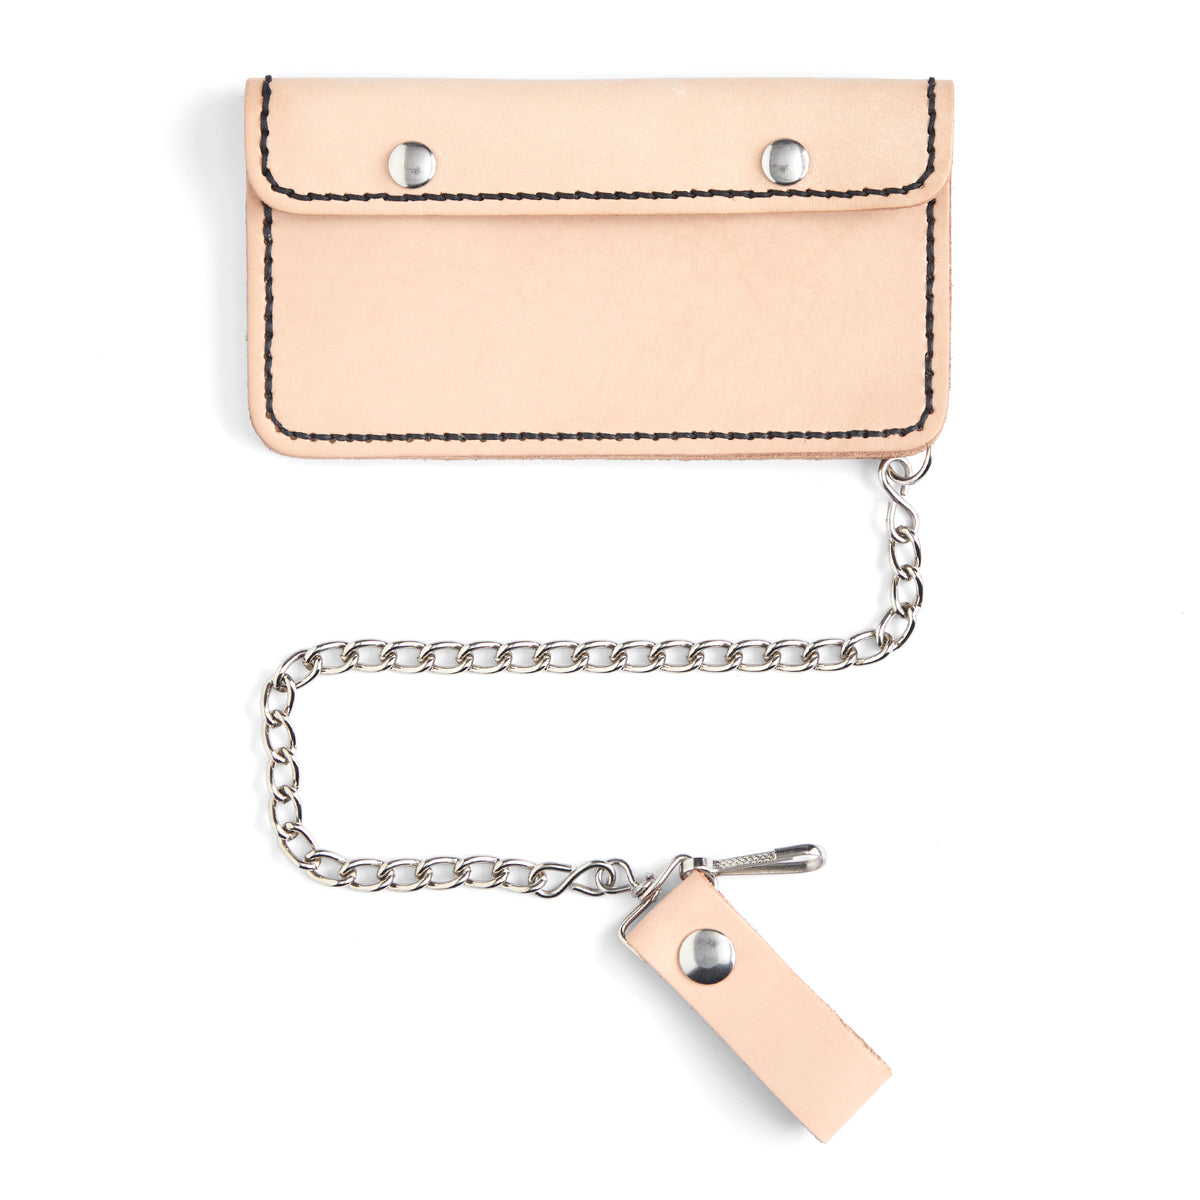 Tandy Leather Wallet Chain with Leather Loop